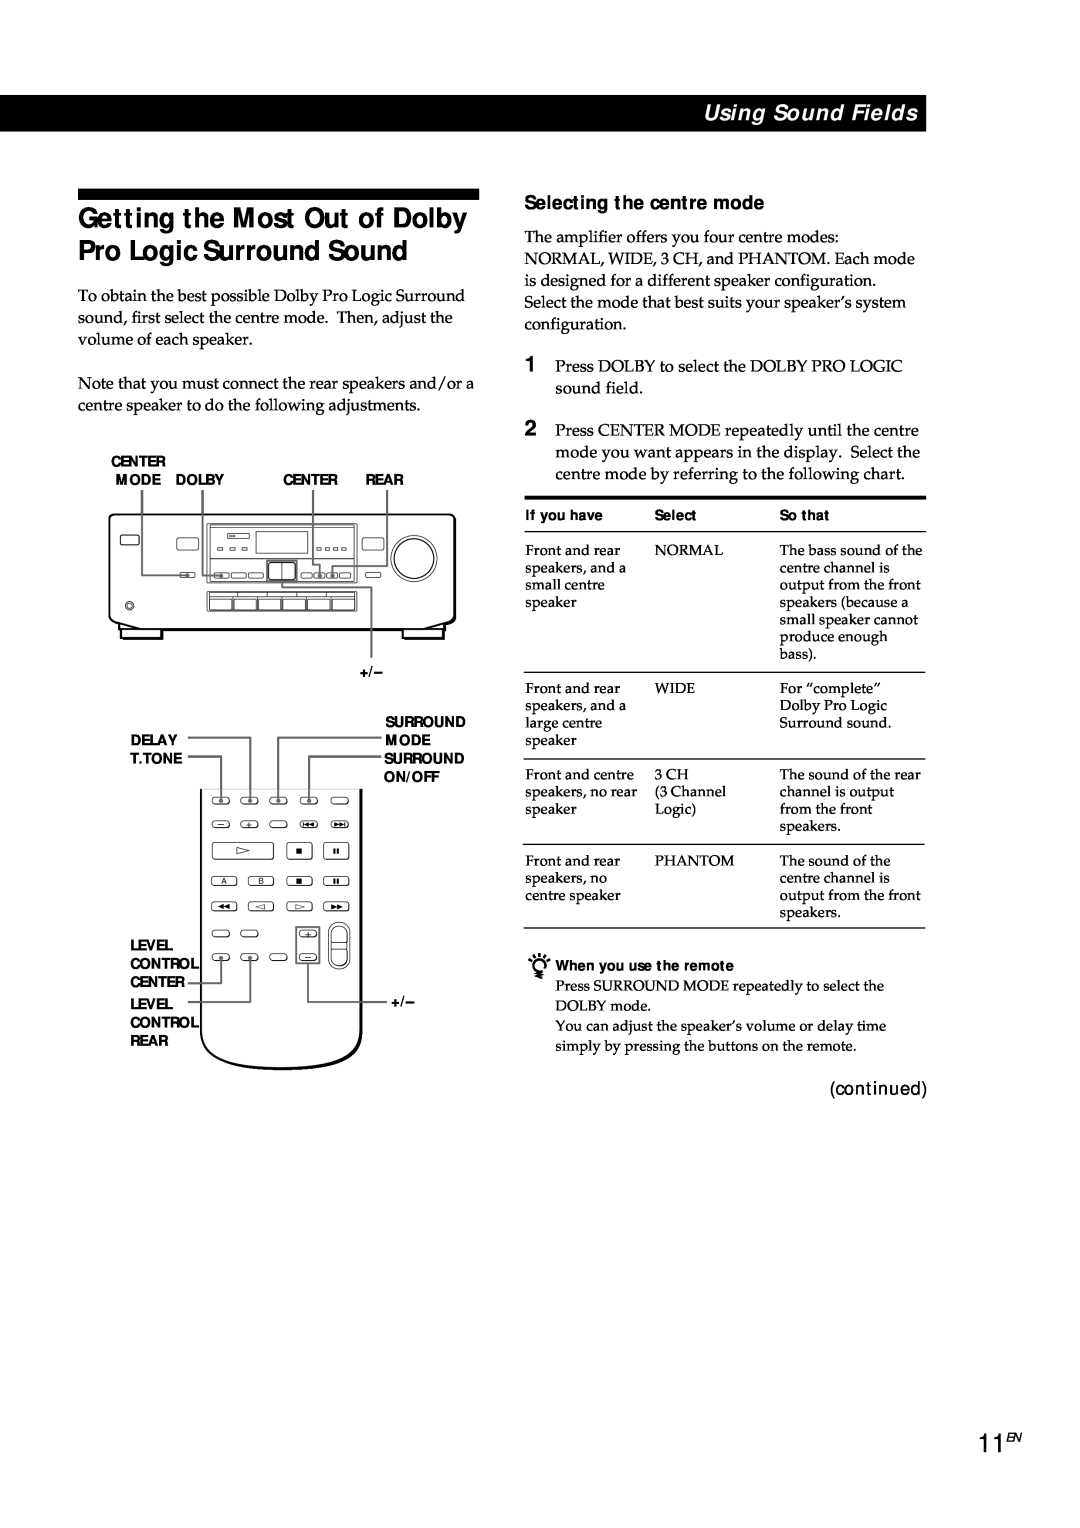 Sony TA-AV561A manual 11EN, Selecting the centre mode, If you have, So that, Using Sound Fields, continued 